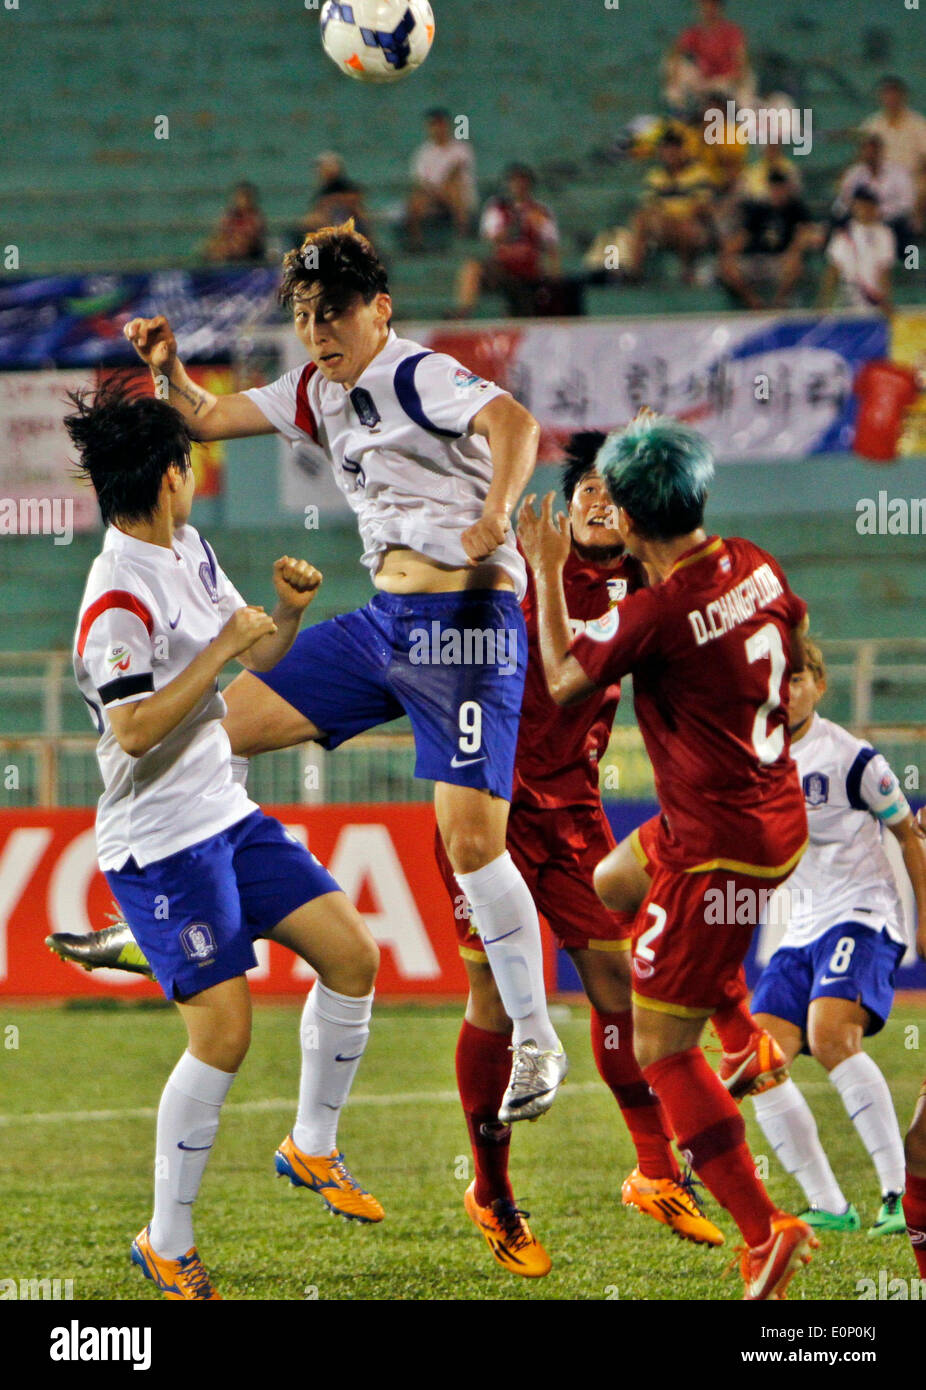 Ho Chi Minh, Vietnam. 17th May, 2014. Park Eun Sun (2nd L) of South Korea vies for the ball during the Group B match against Thailand at the 2014 Women's AFC Cup held at Thong Nhat Stadium in Ho Chi Minh city, Vietnam, May 17, 2014. South Korea advance to World Cup after beating Thailand 4-0. Credit:  Nguyen Le Huyen/Xinhua/Alamy Live News Stock Photo